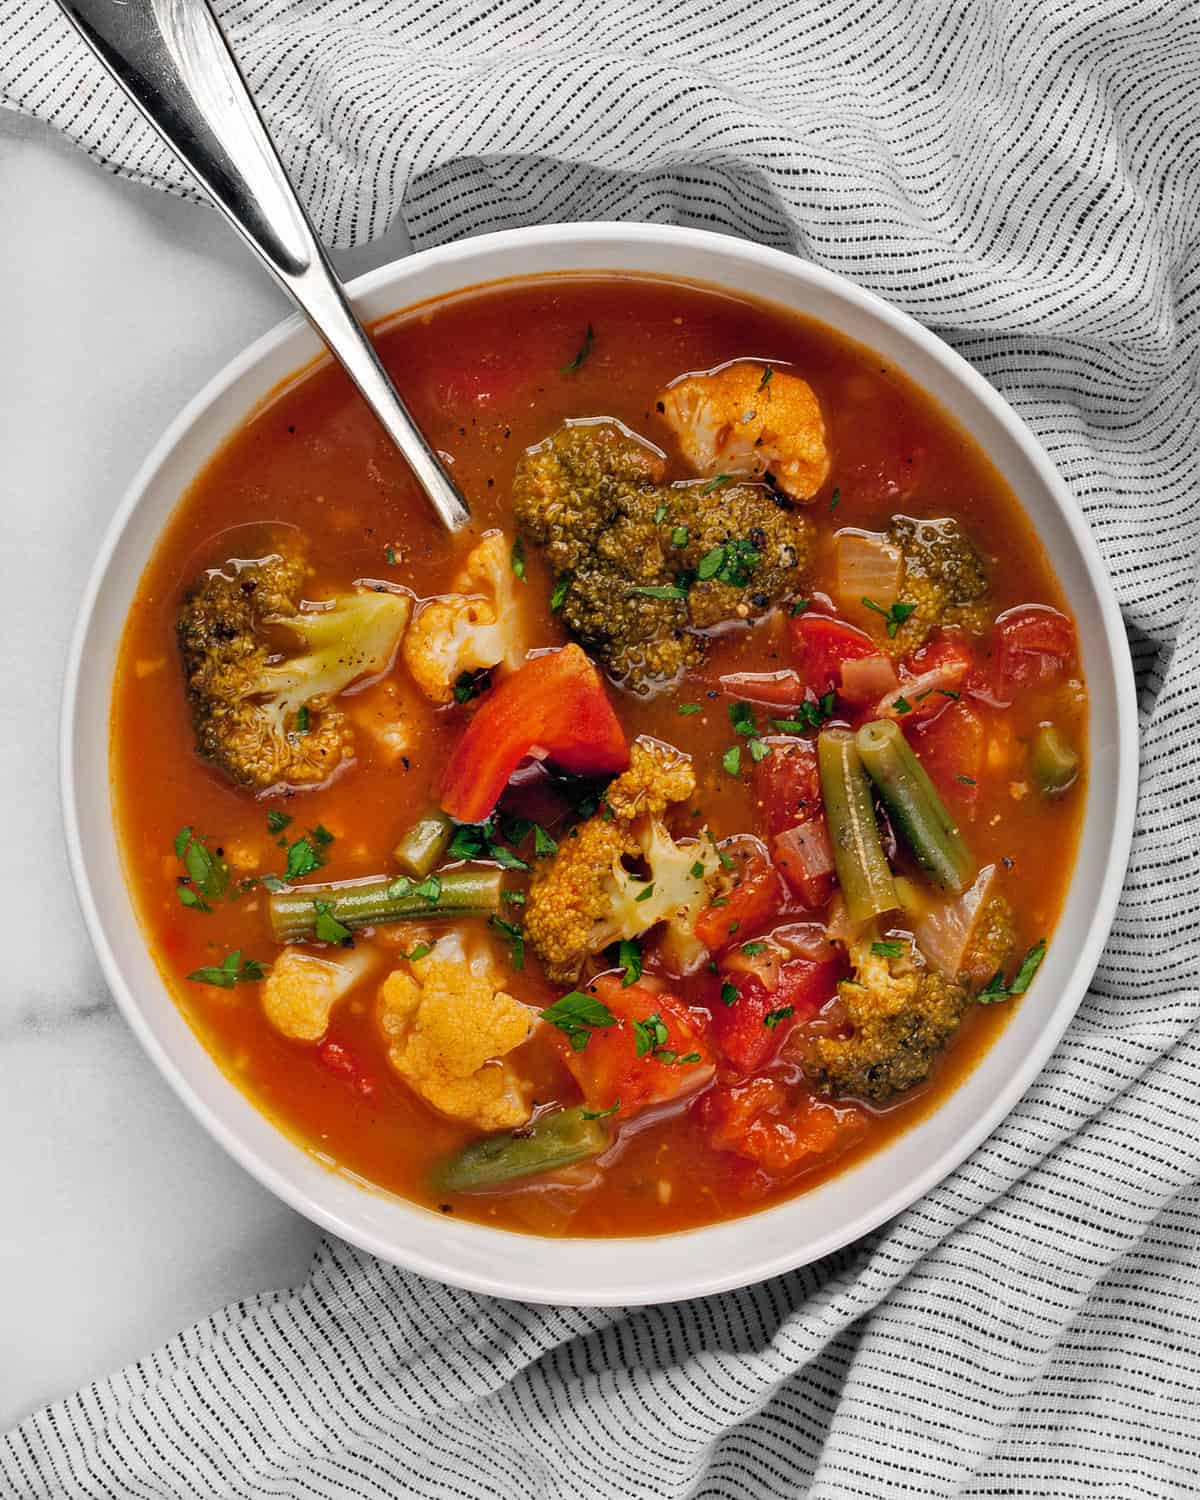 Vegetable soup with tomatoes, cauliflower and broccoli in a bowl.